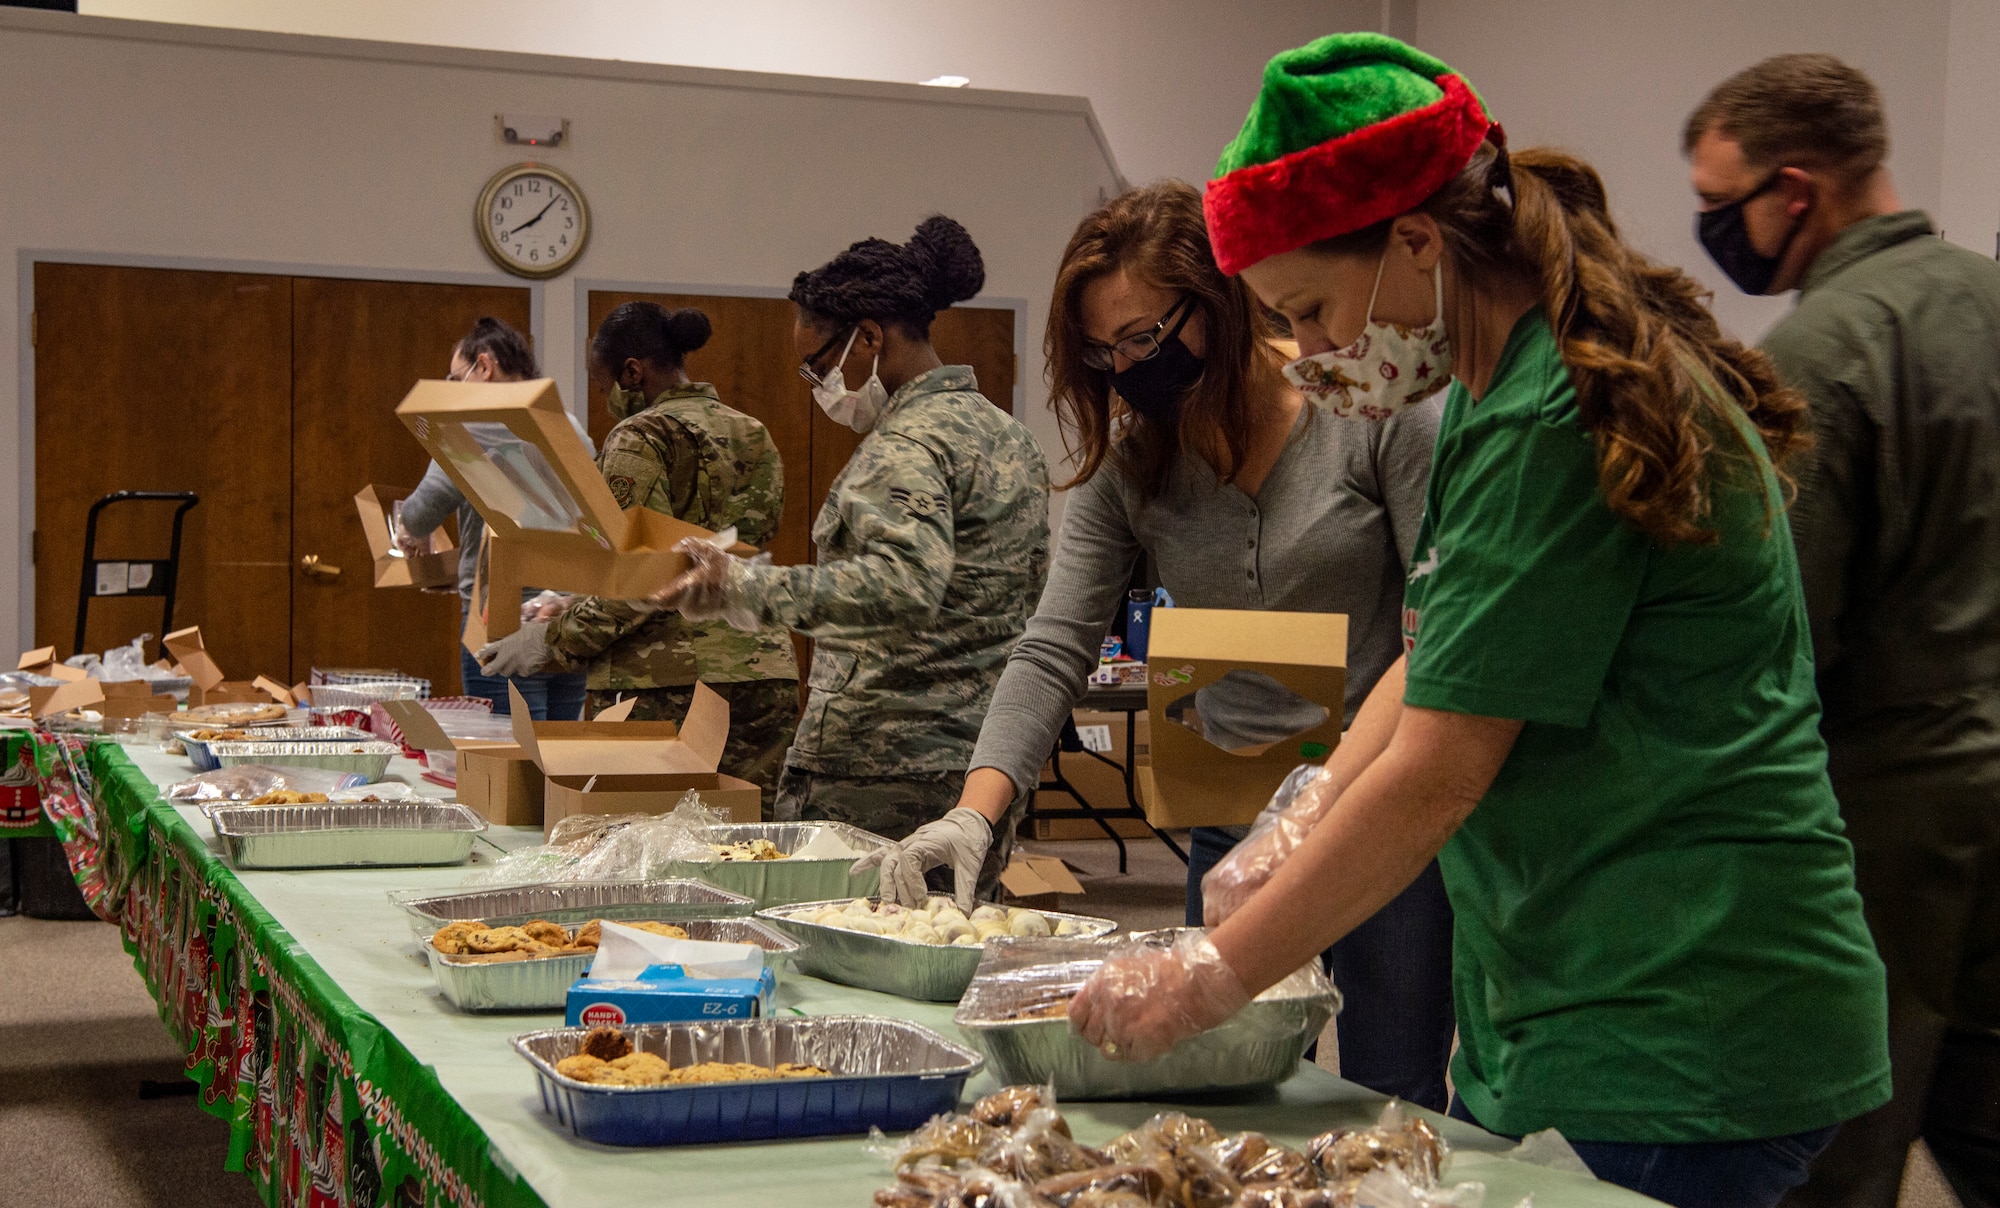 Volunteers box up cookies during Operation Cookie Drop Dec. 9, 2020, at Joint Base Lewis-McChord, Wash. The operation received more than 1,000 dozen cookies, which exceeded the goal of 700 dozen cookies for dorm resident Airmen. (U.S. Air Force photo by Senior Airman Tryphena Mayhugh)